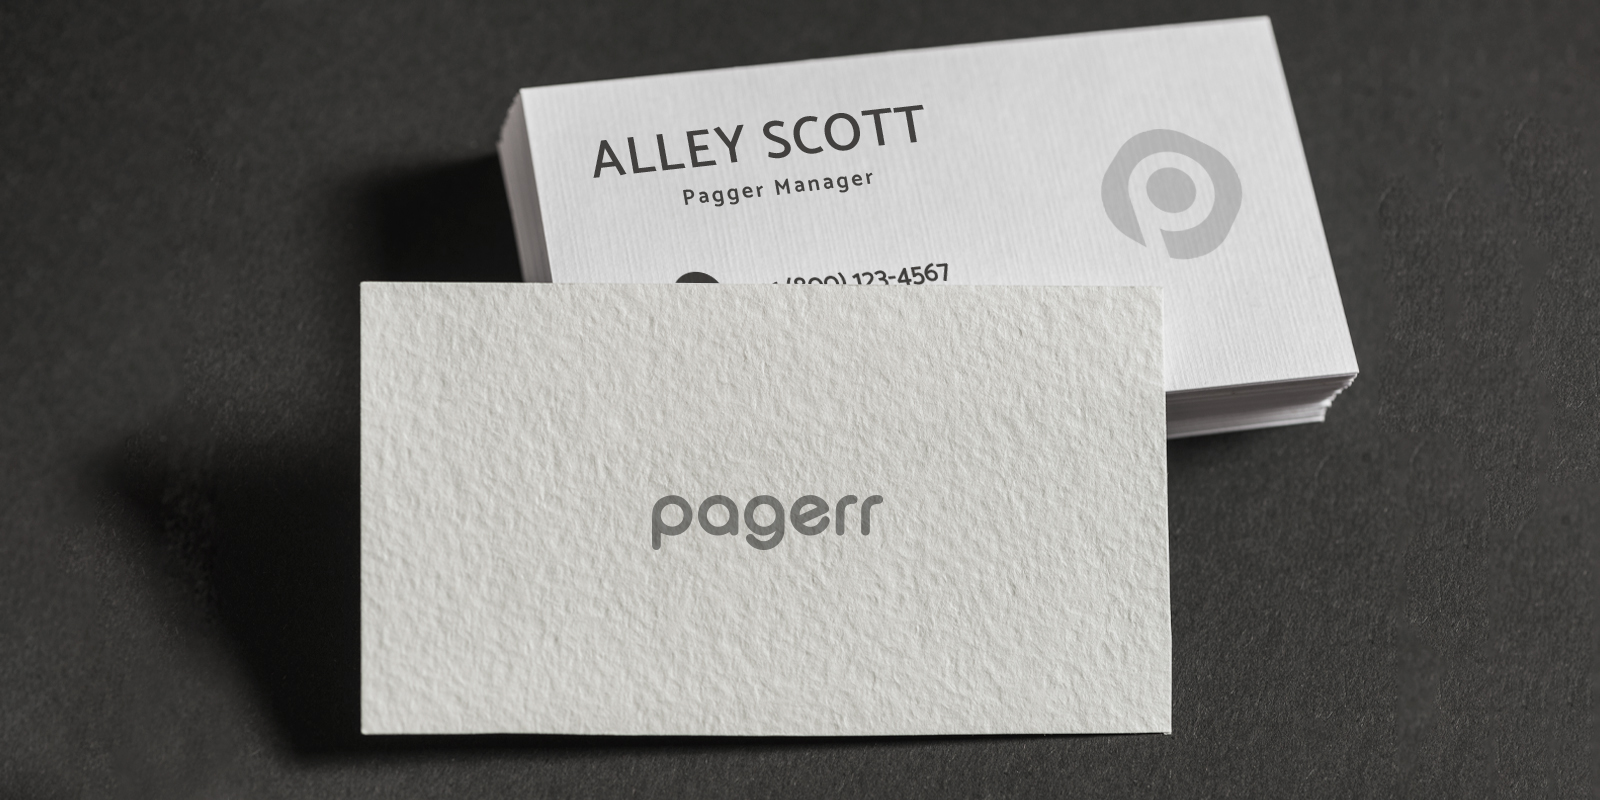 Special material business cards in Tallinn - Print with Pagerr